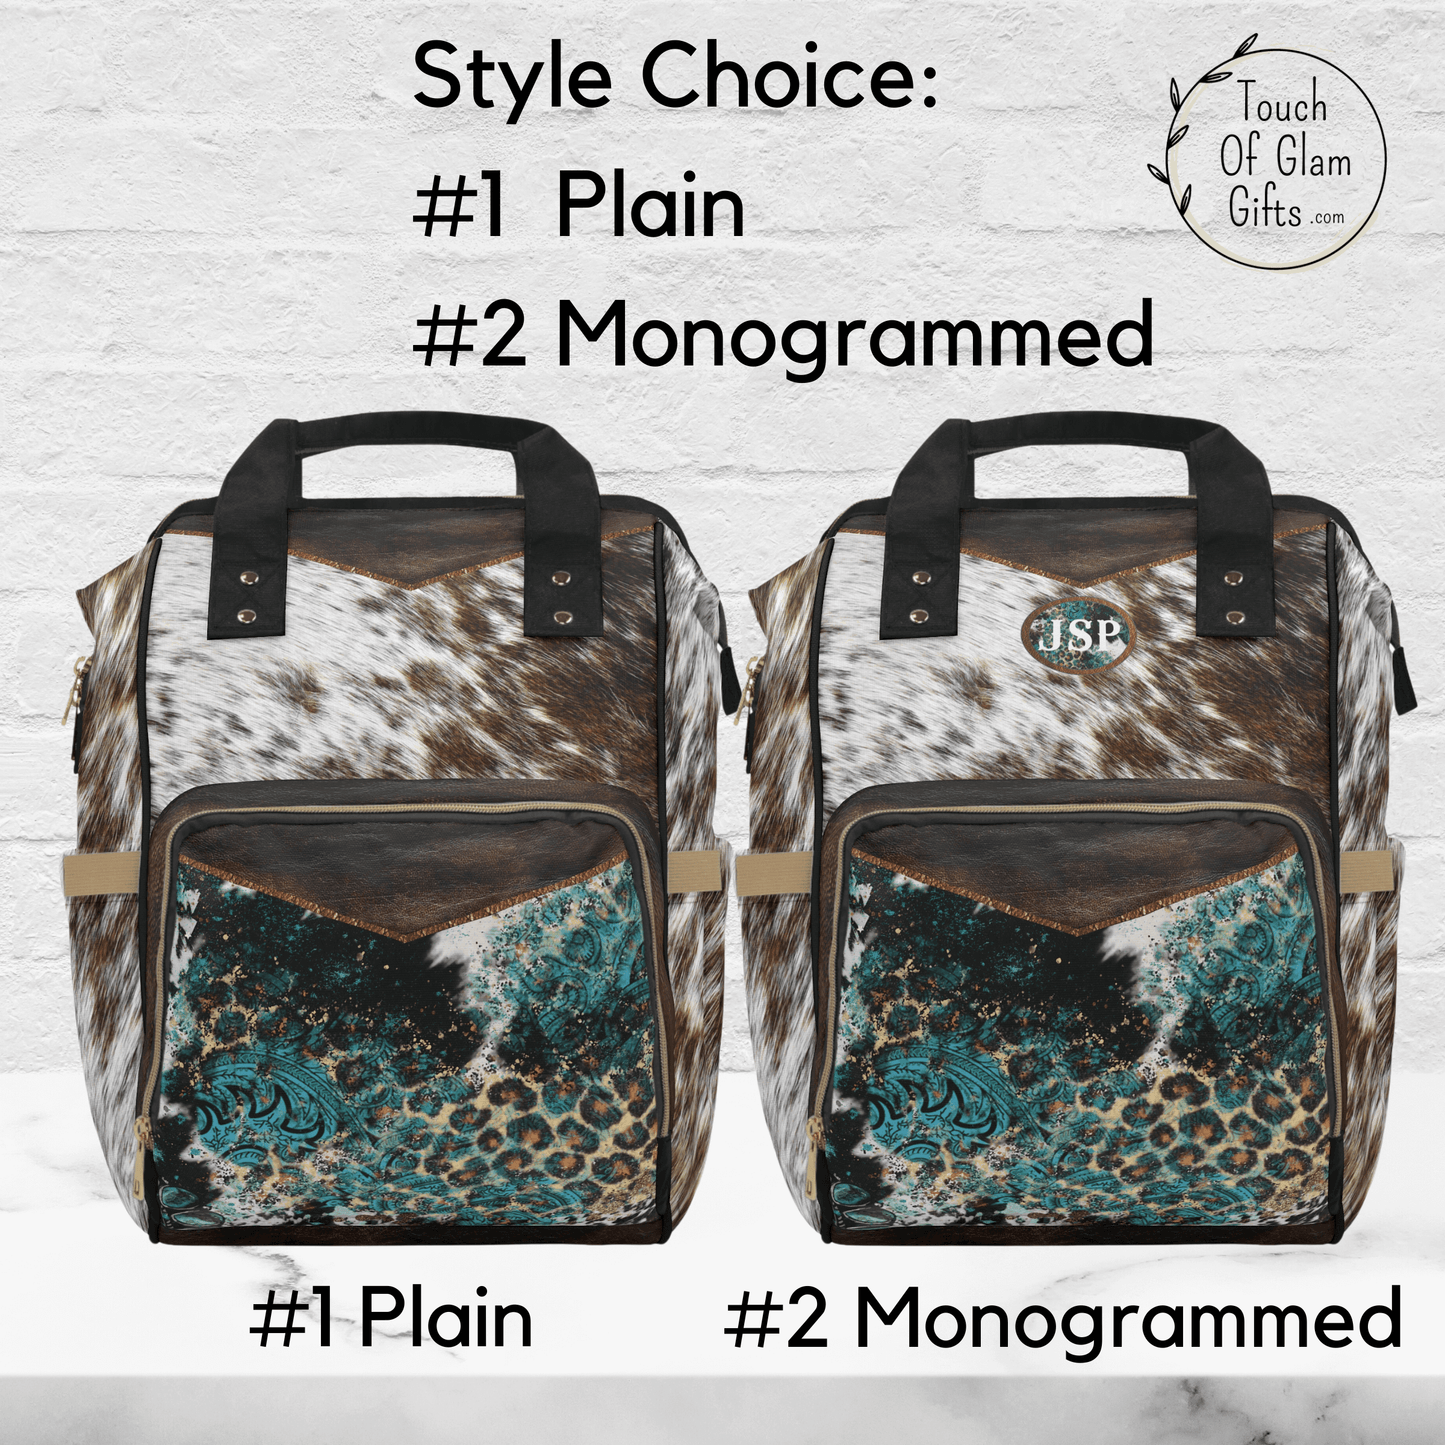 Style choices for our western diaper bag backpack is plain or monogrammed. The monogrammed patch matches the turquoise animal print on the front pocket.